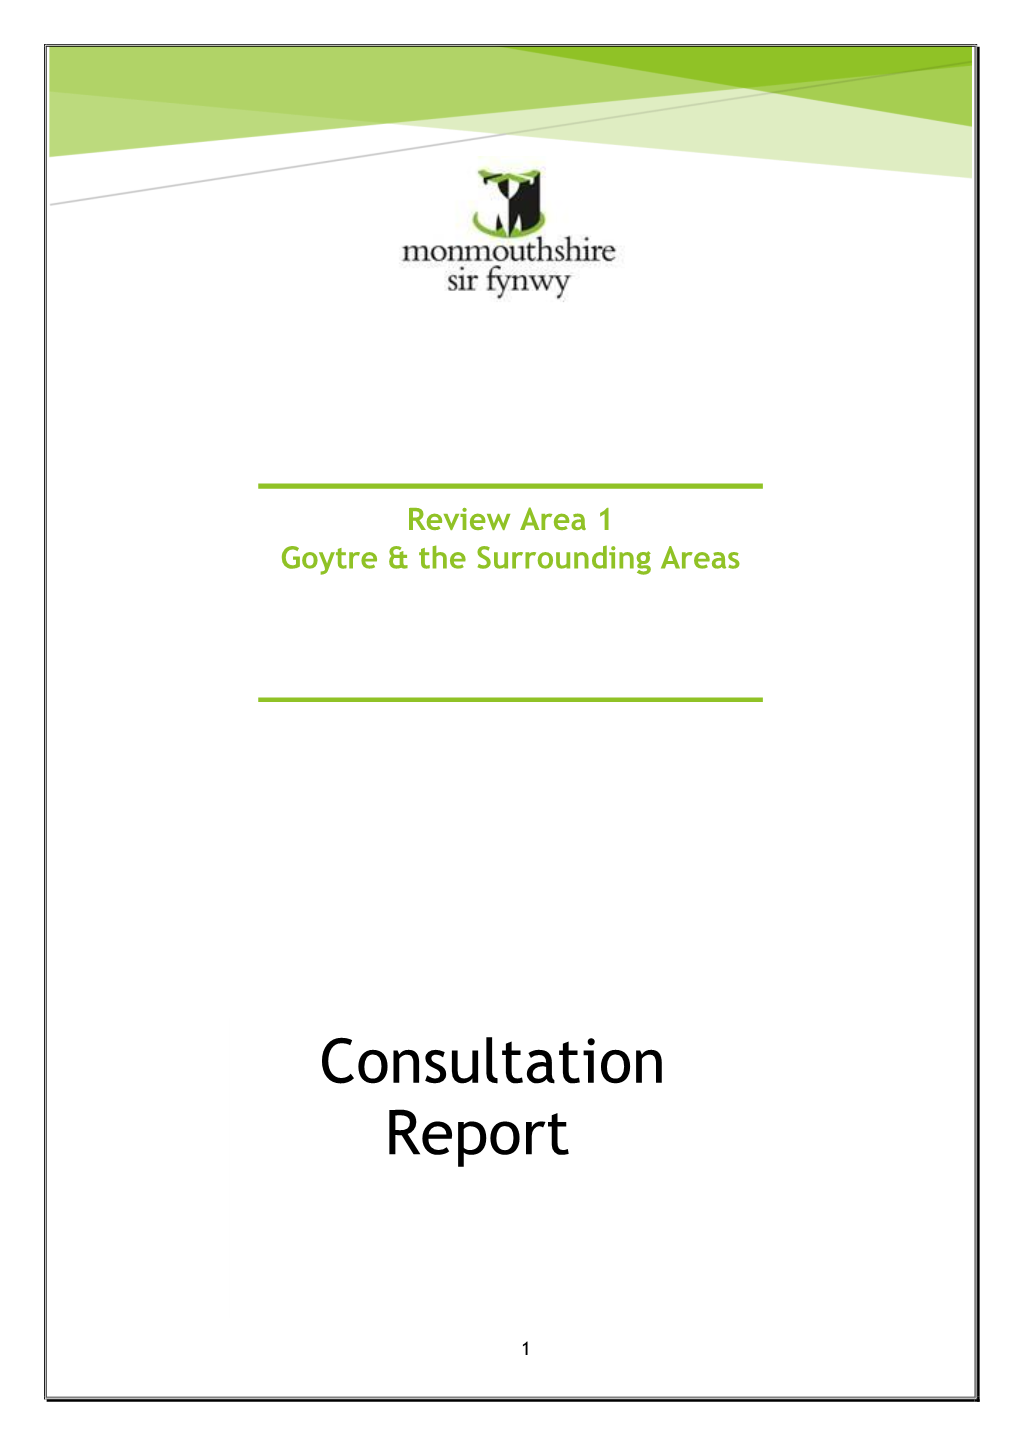 Consultation Report – Review Area 2